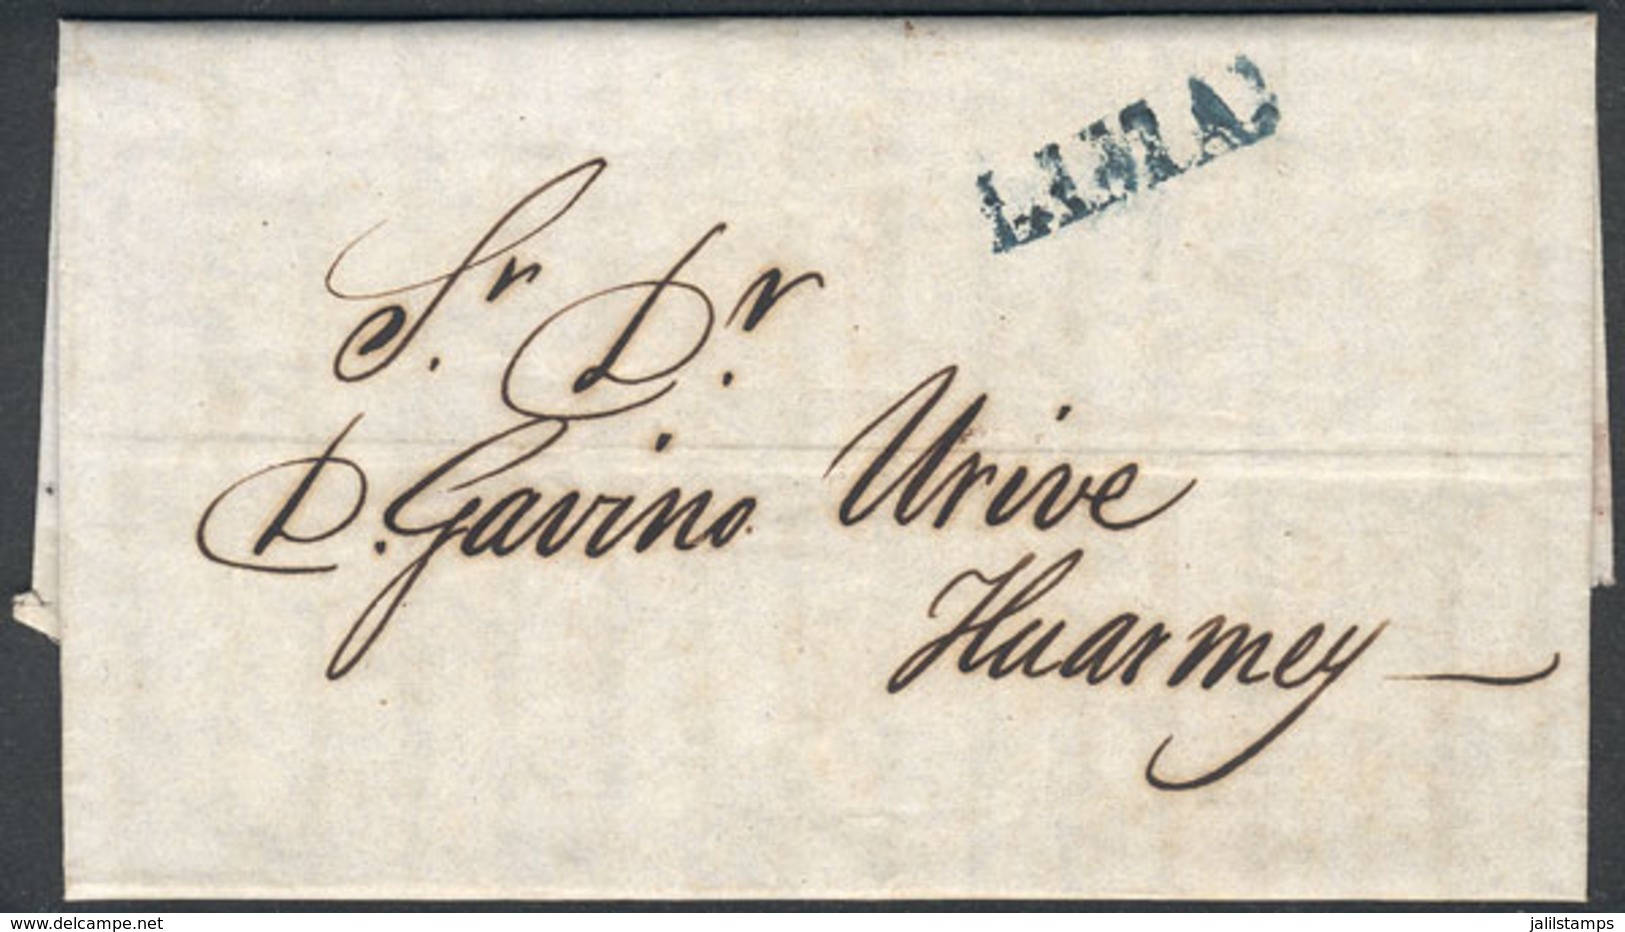 PERU: Long Entire Letter Of Several Pages, Dated 25/MAY/1849, With Blue LIMA Marking, To Huarney, Very Fine Quality! - Perù